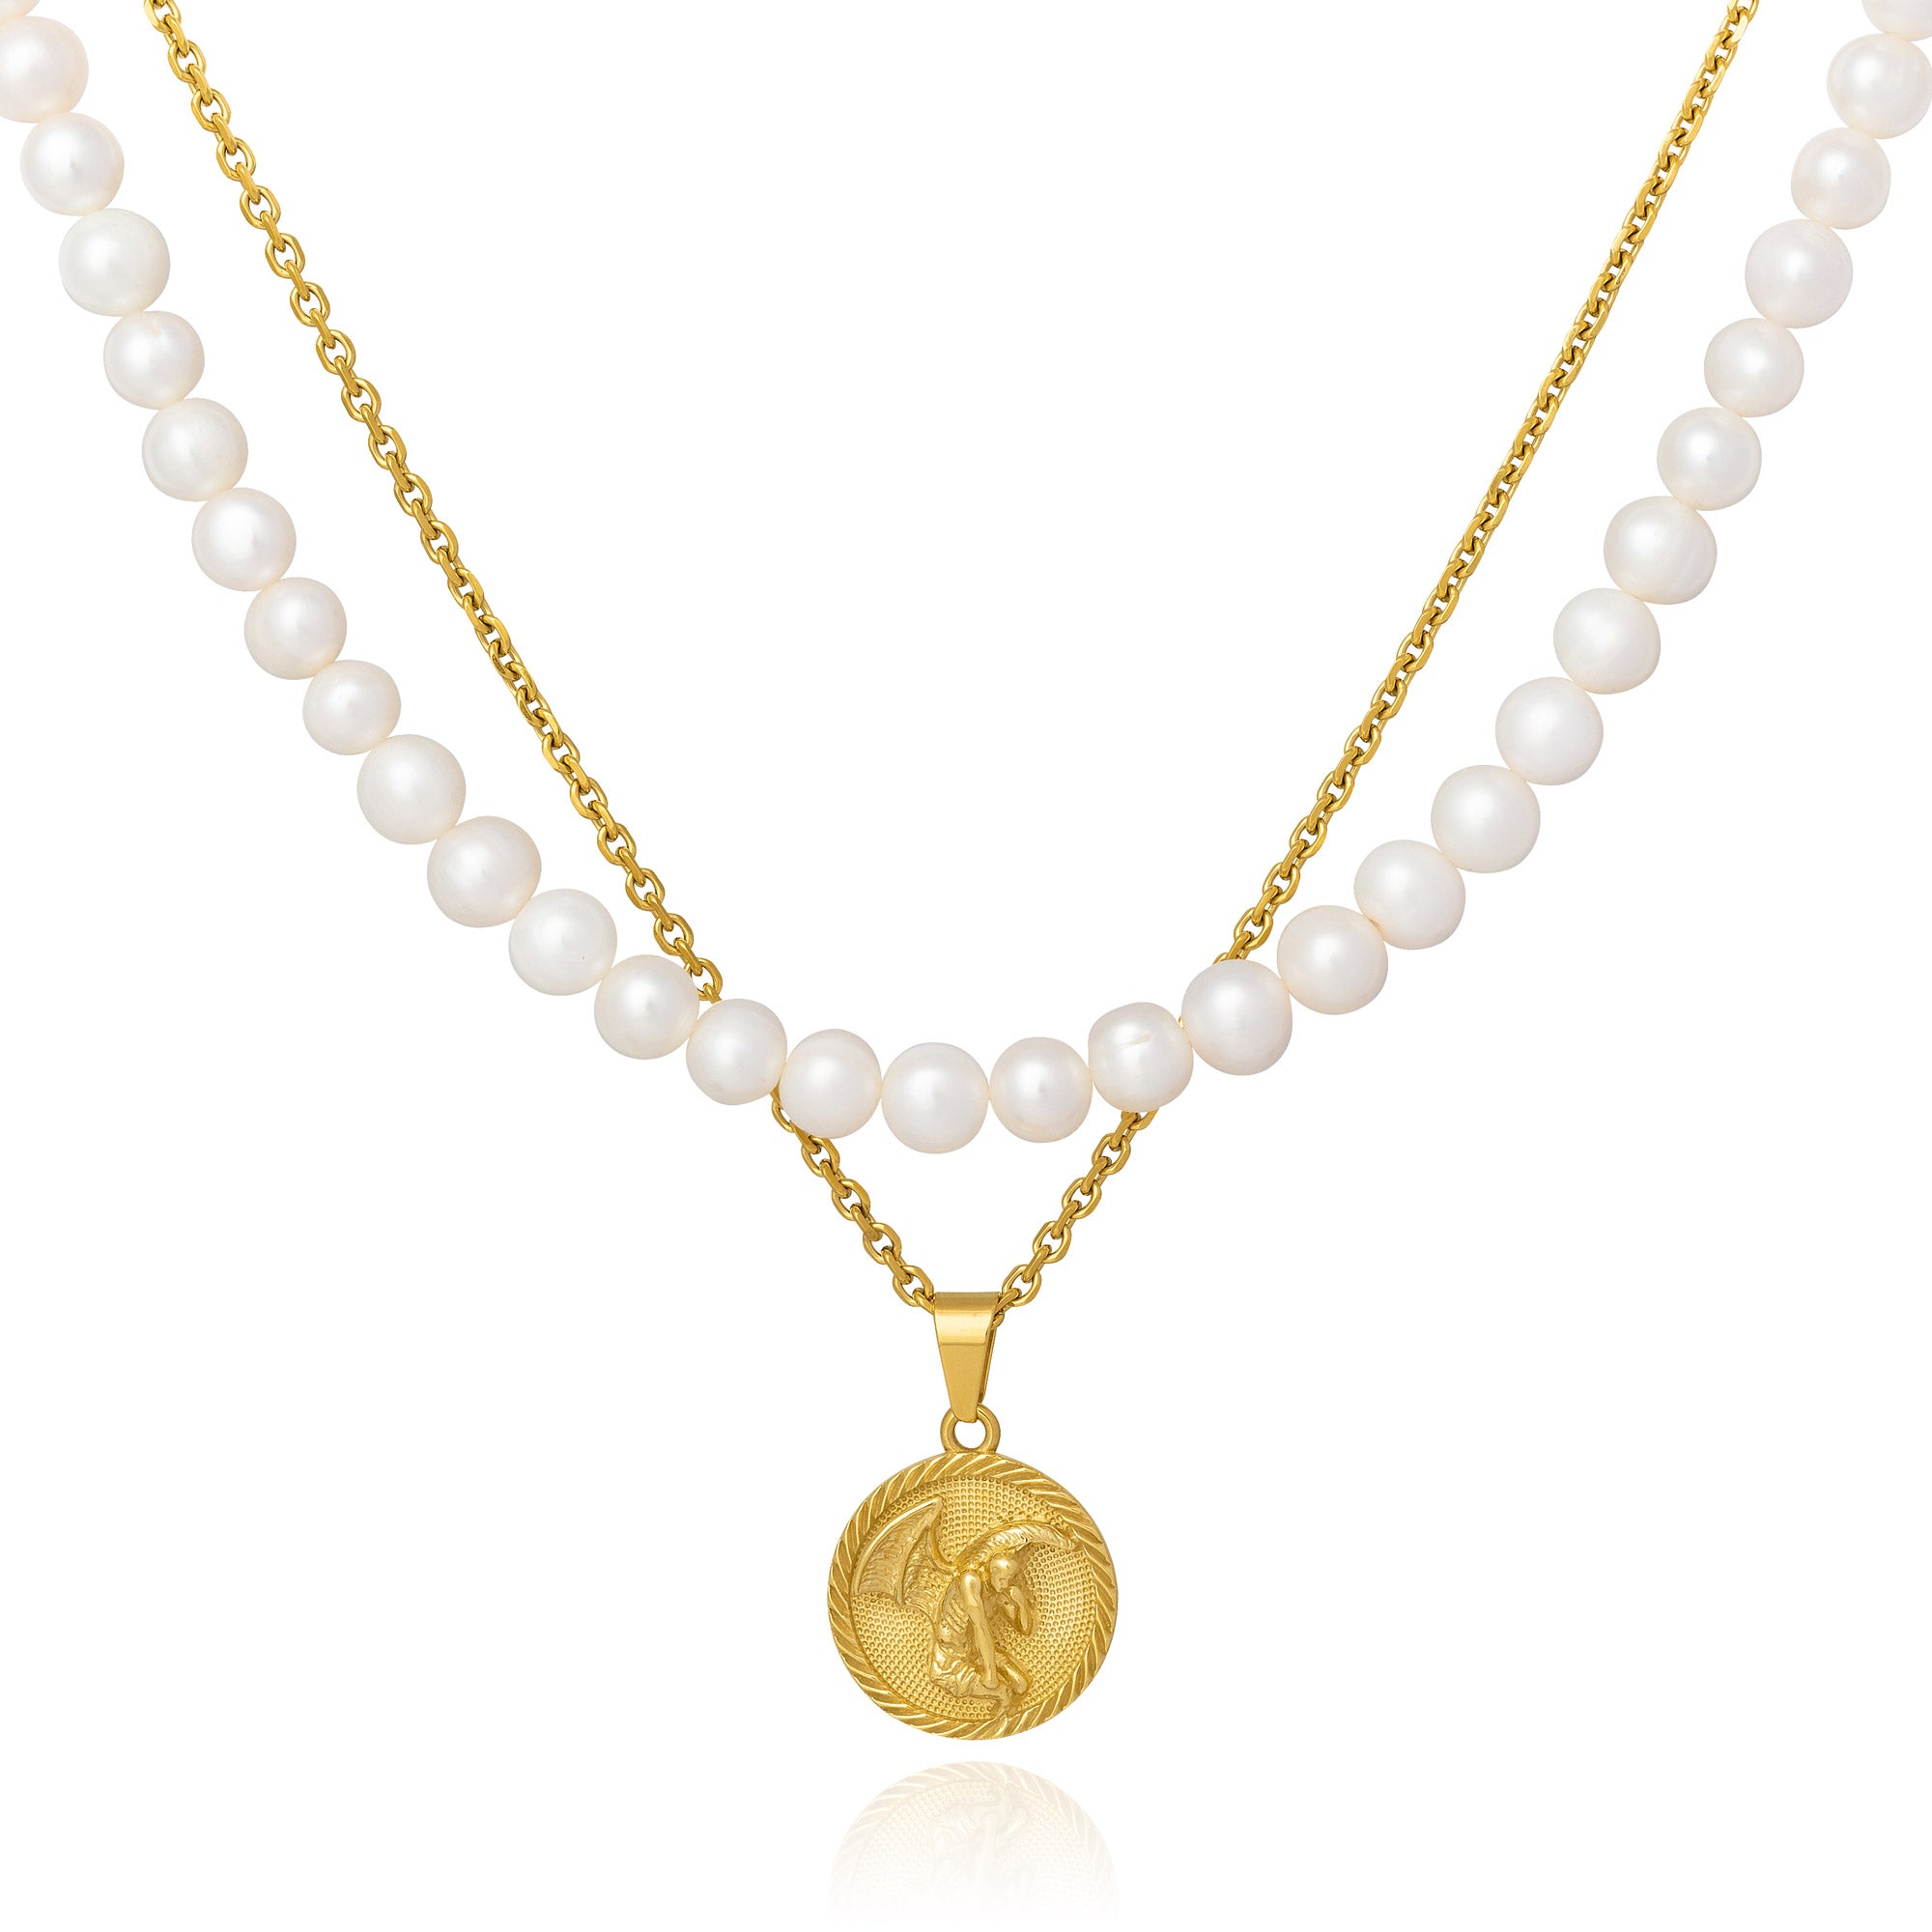 Pearl chain Set gold medallion pendant necklace by statement collective 